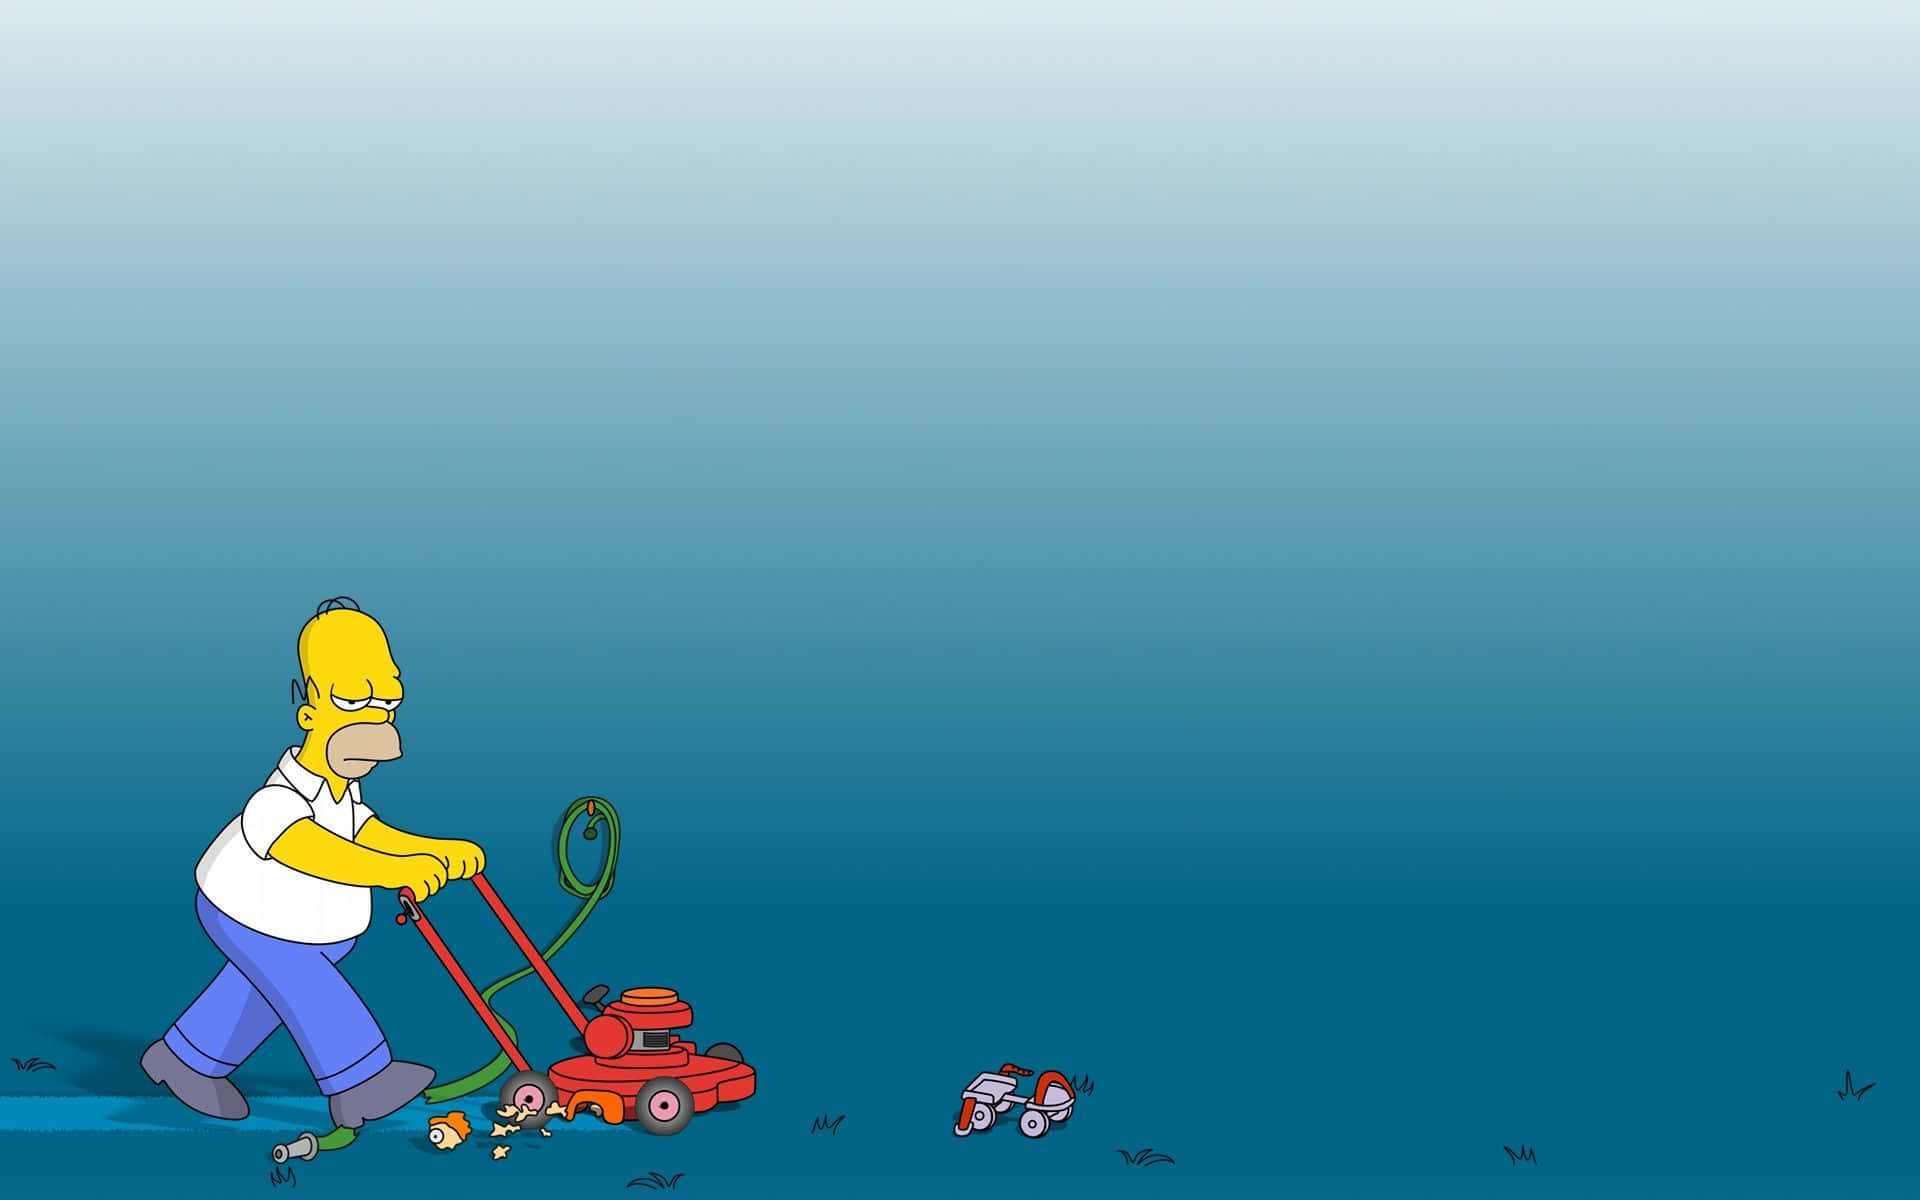 Get Ready to Explore a Digital World of Fun with Simpson's PC Wallpaper